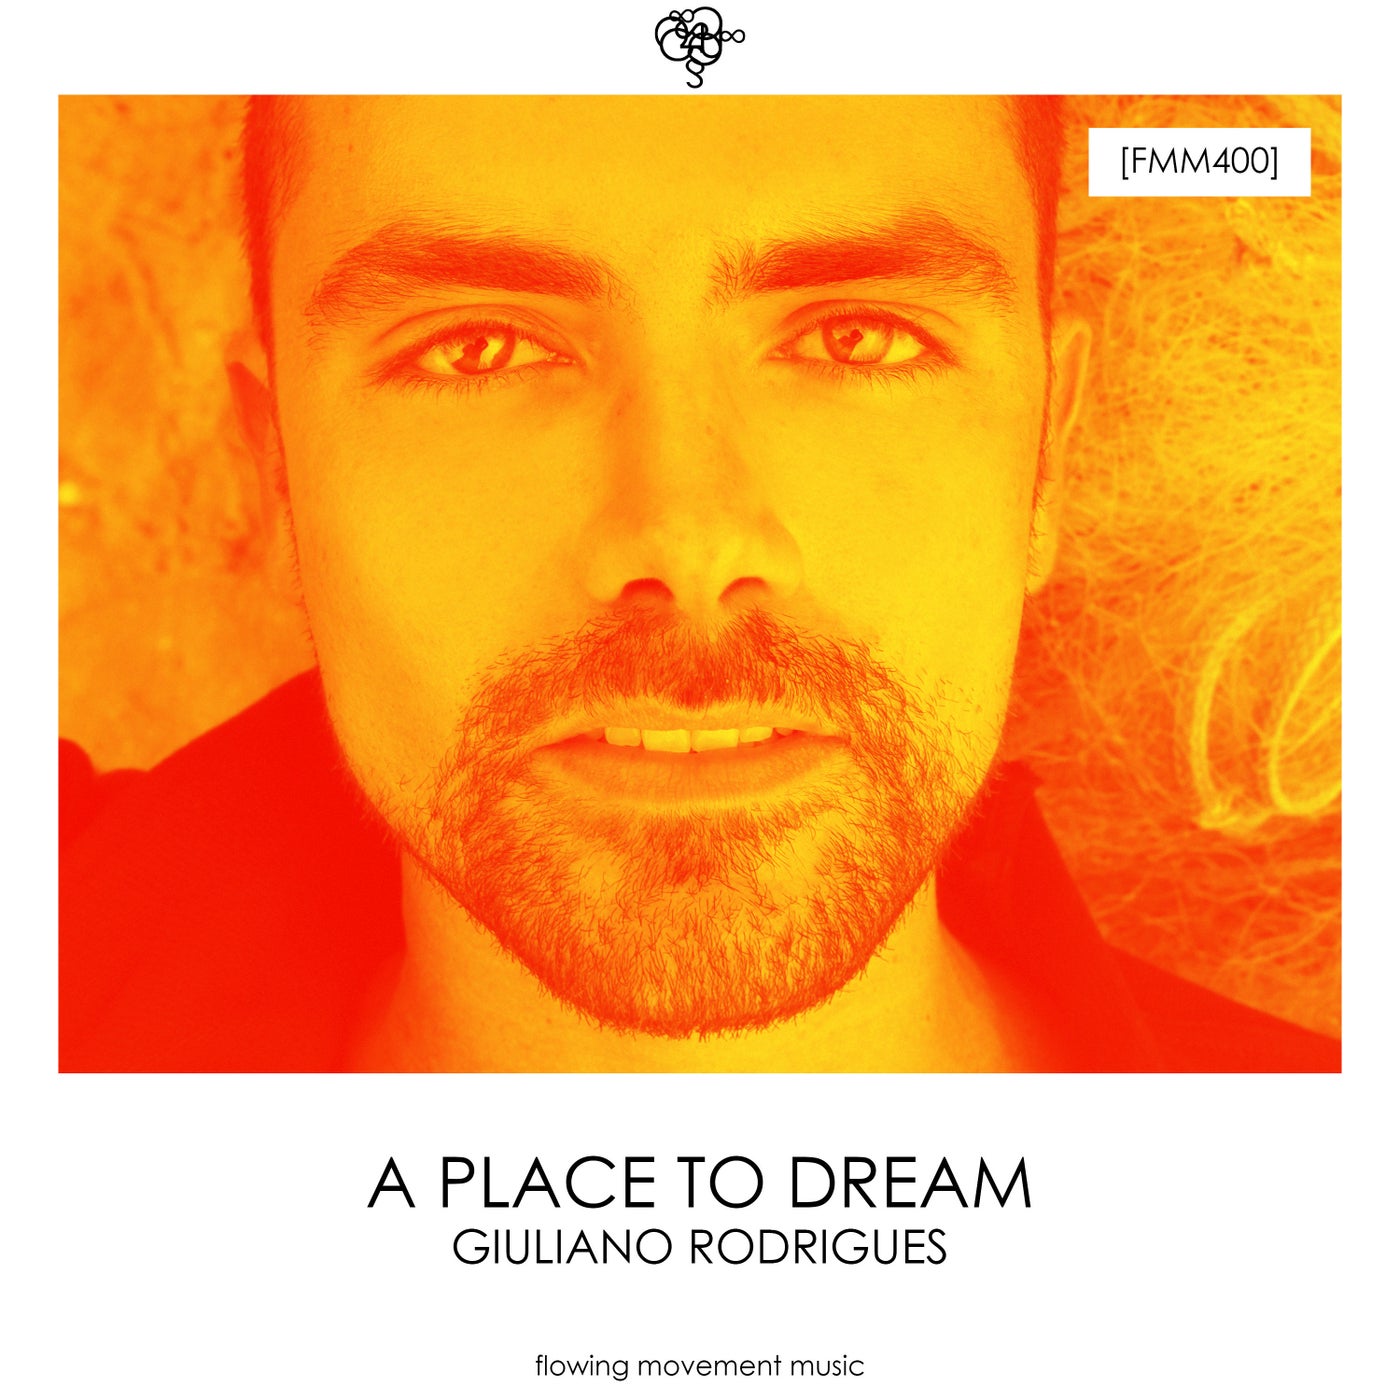 Giuliano Rodrigues - A Place To Dream [Flowing Movement Music]